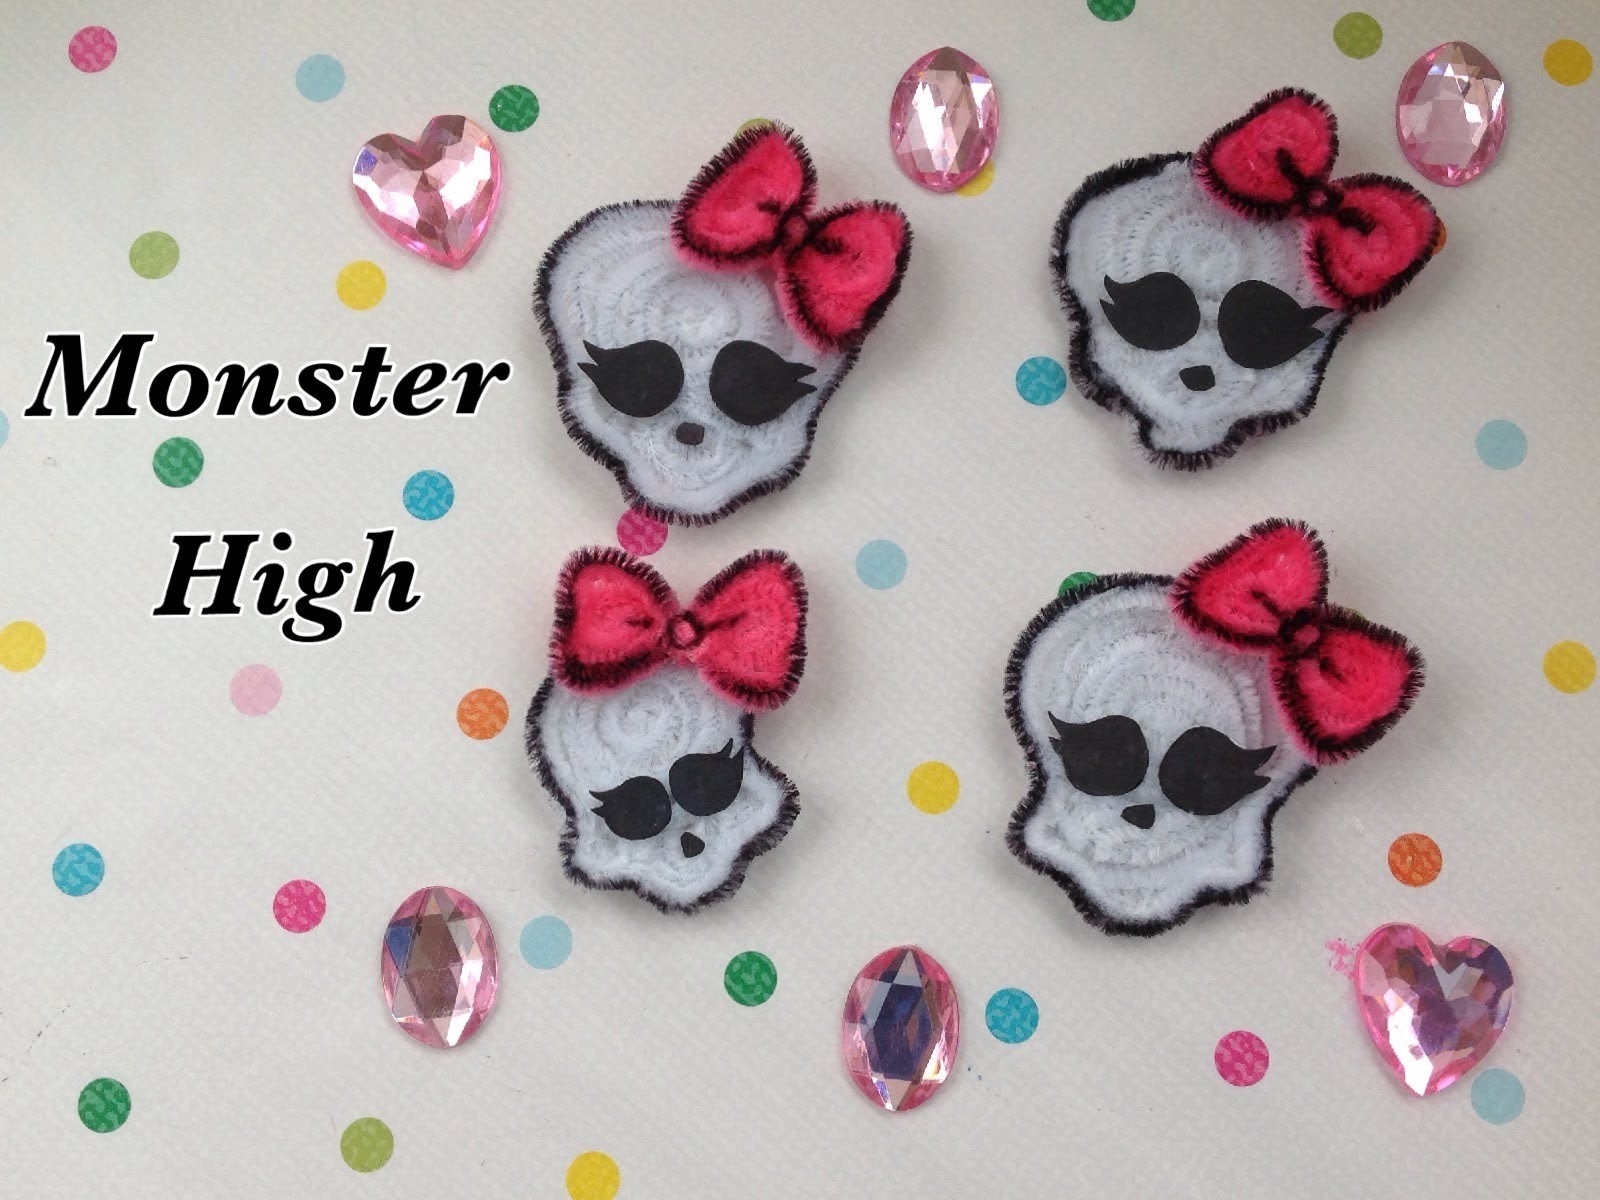 MONSTER HIGH LOGO  HECHO CON LIMPIA PIPAS.- PIPE CLEANER MONSTER HIGH LOGO